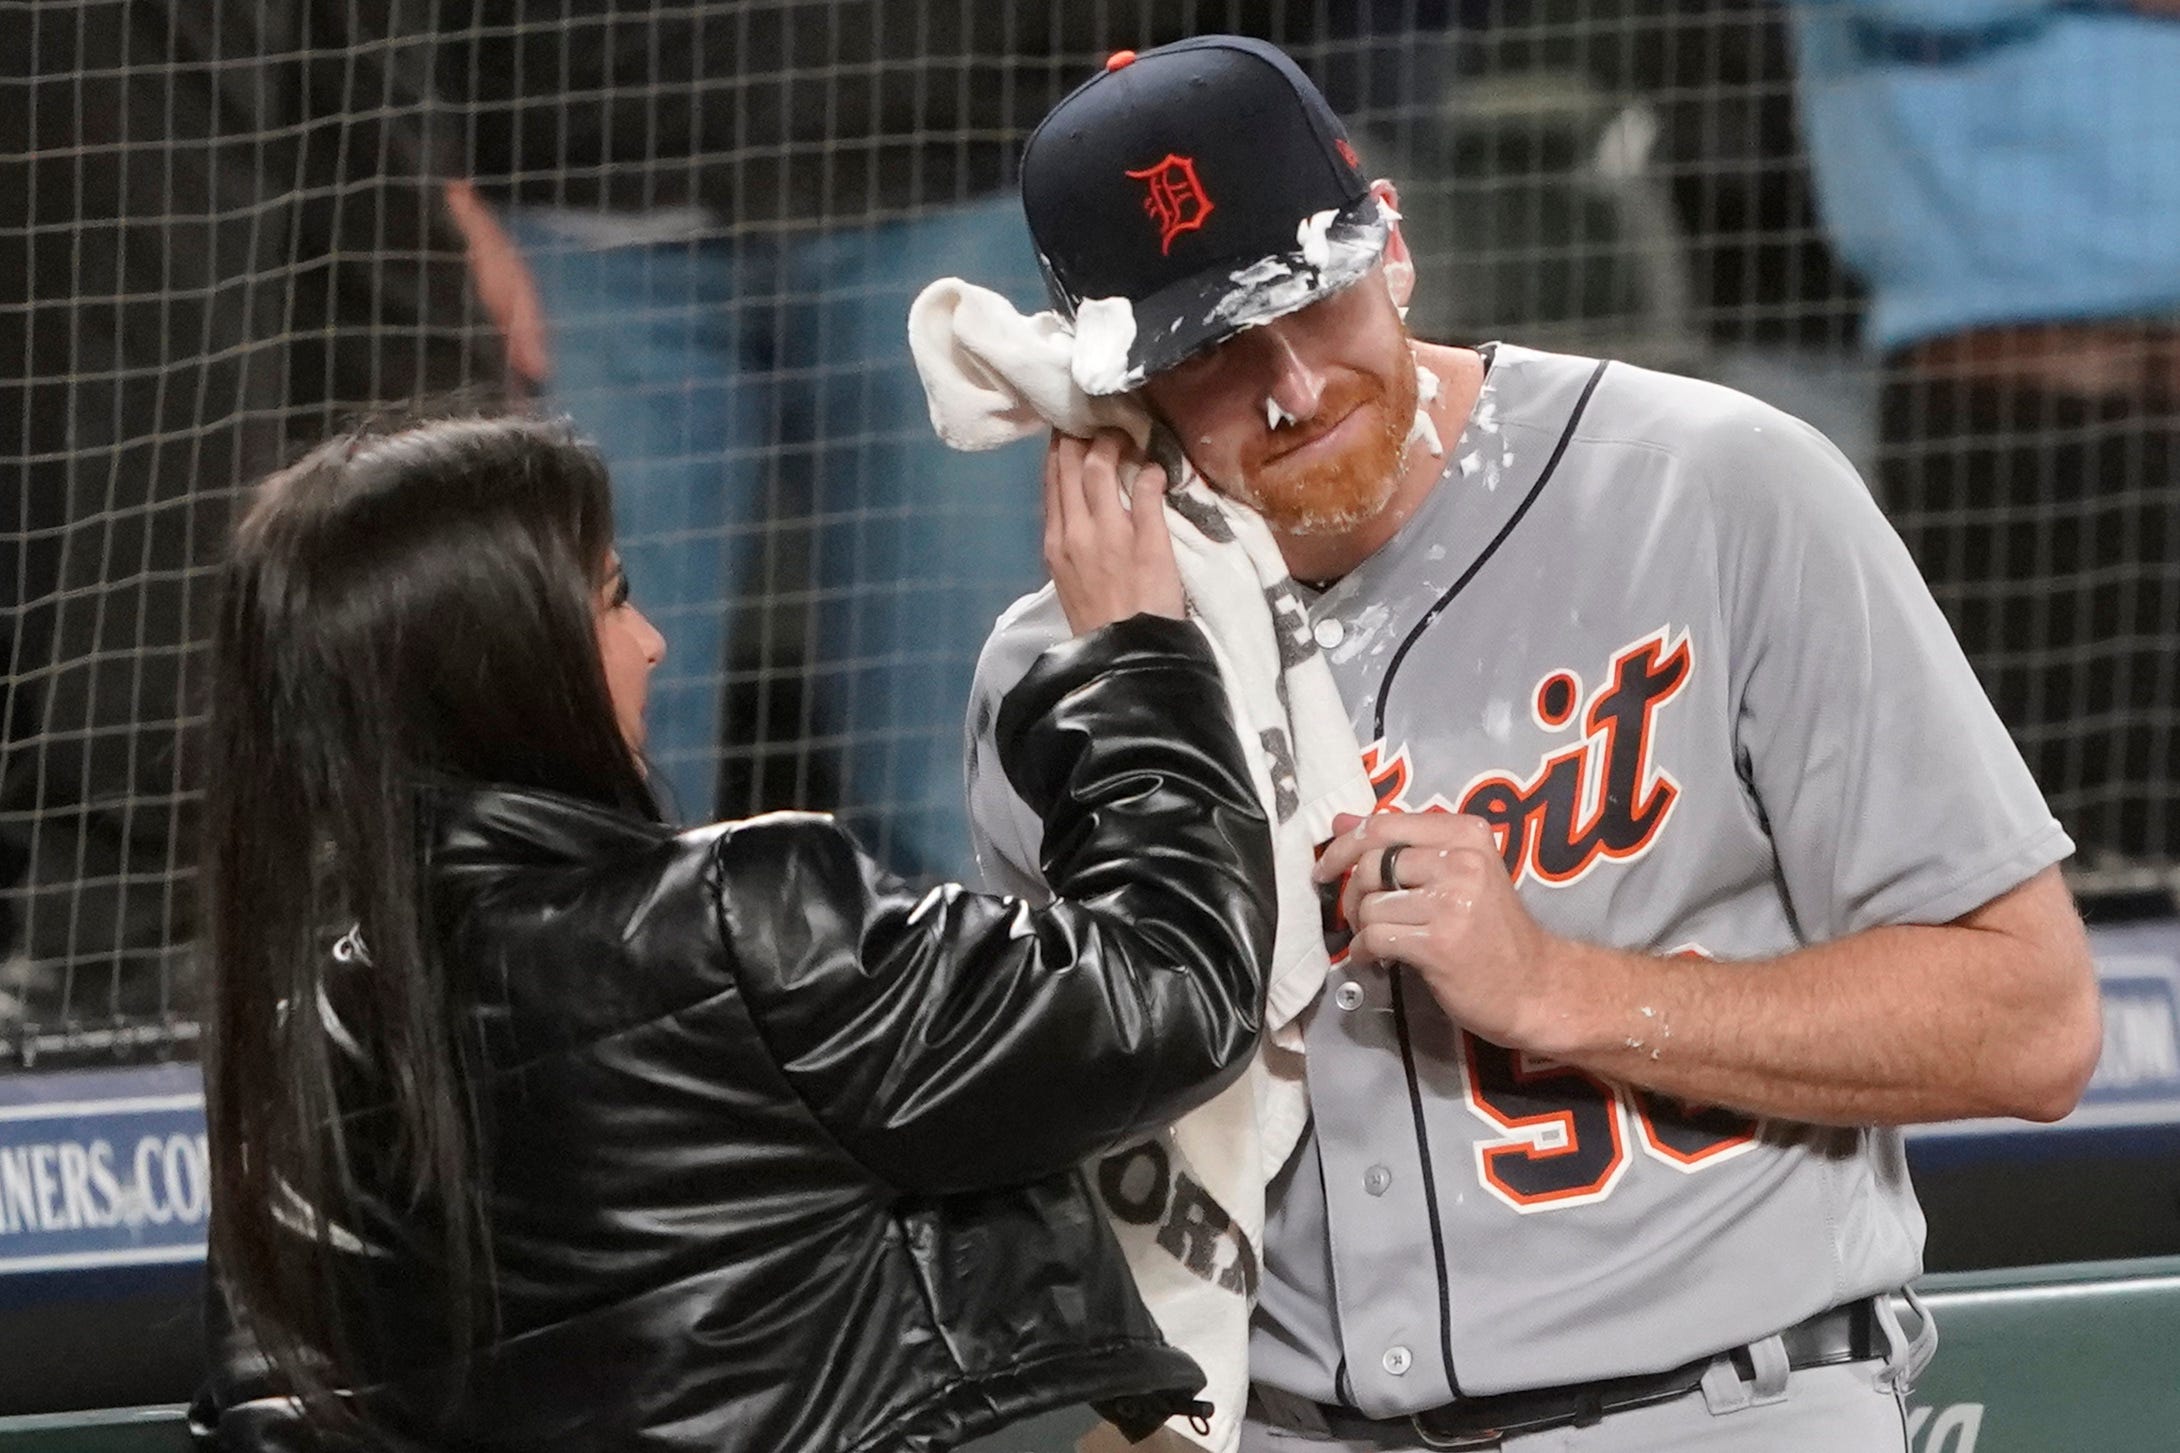 Detroit Tigers starting pitcher Spencer Turnbull (56) has shaving cream wiped from his face by his girlfriend after he threw a no-hitter in the team's baseball game against the Seattle Mariners, Tuesday, May 18, 2021, in Seattle.